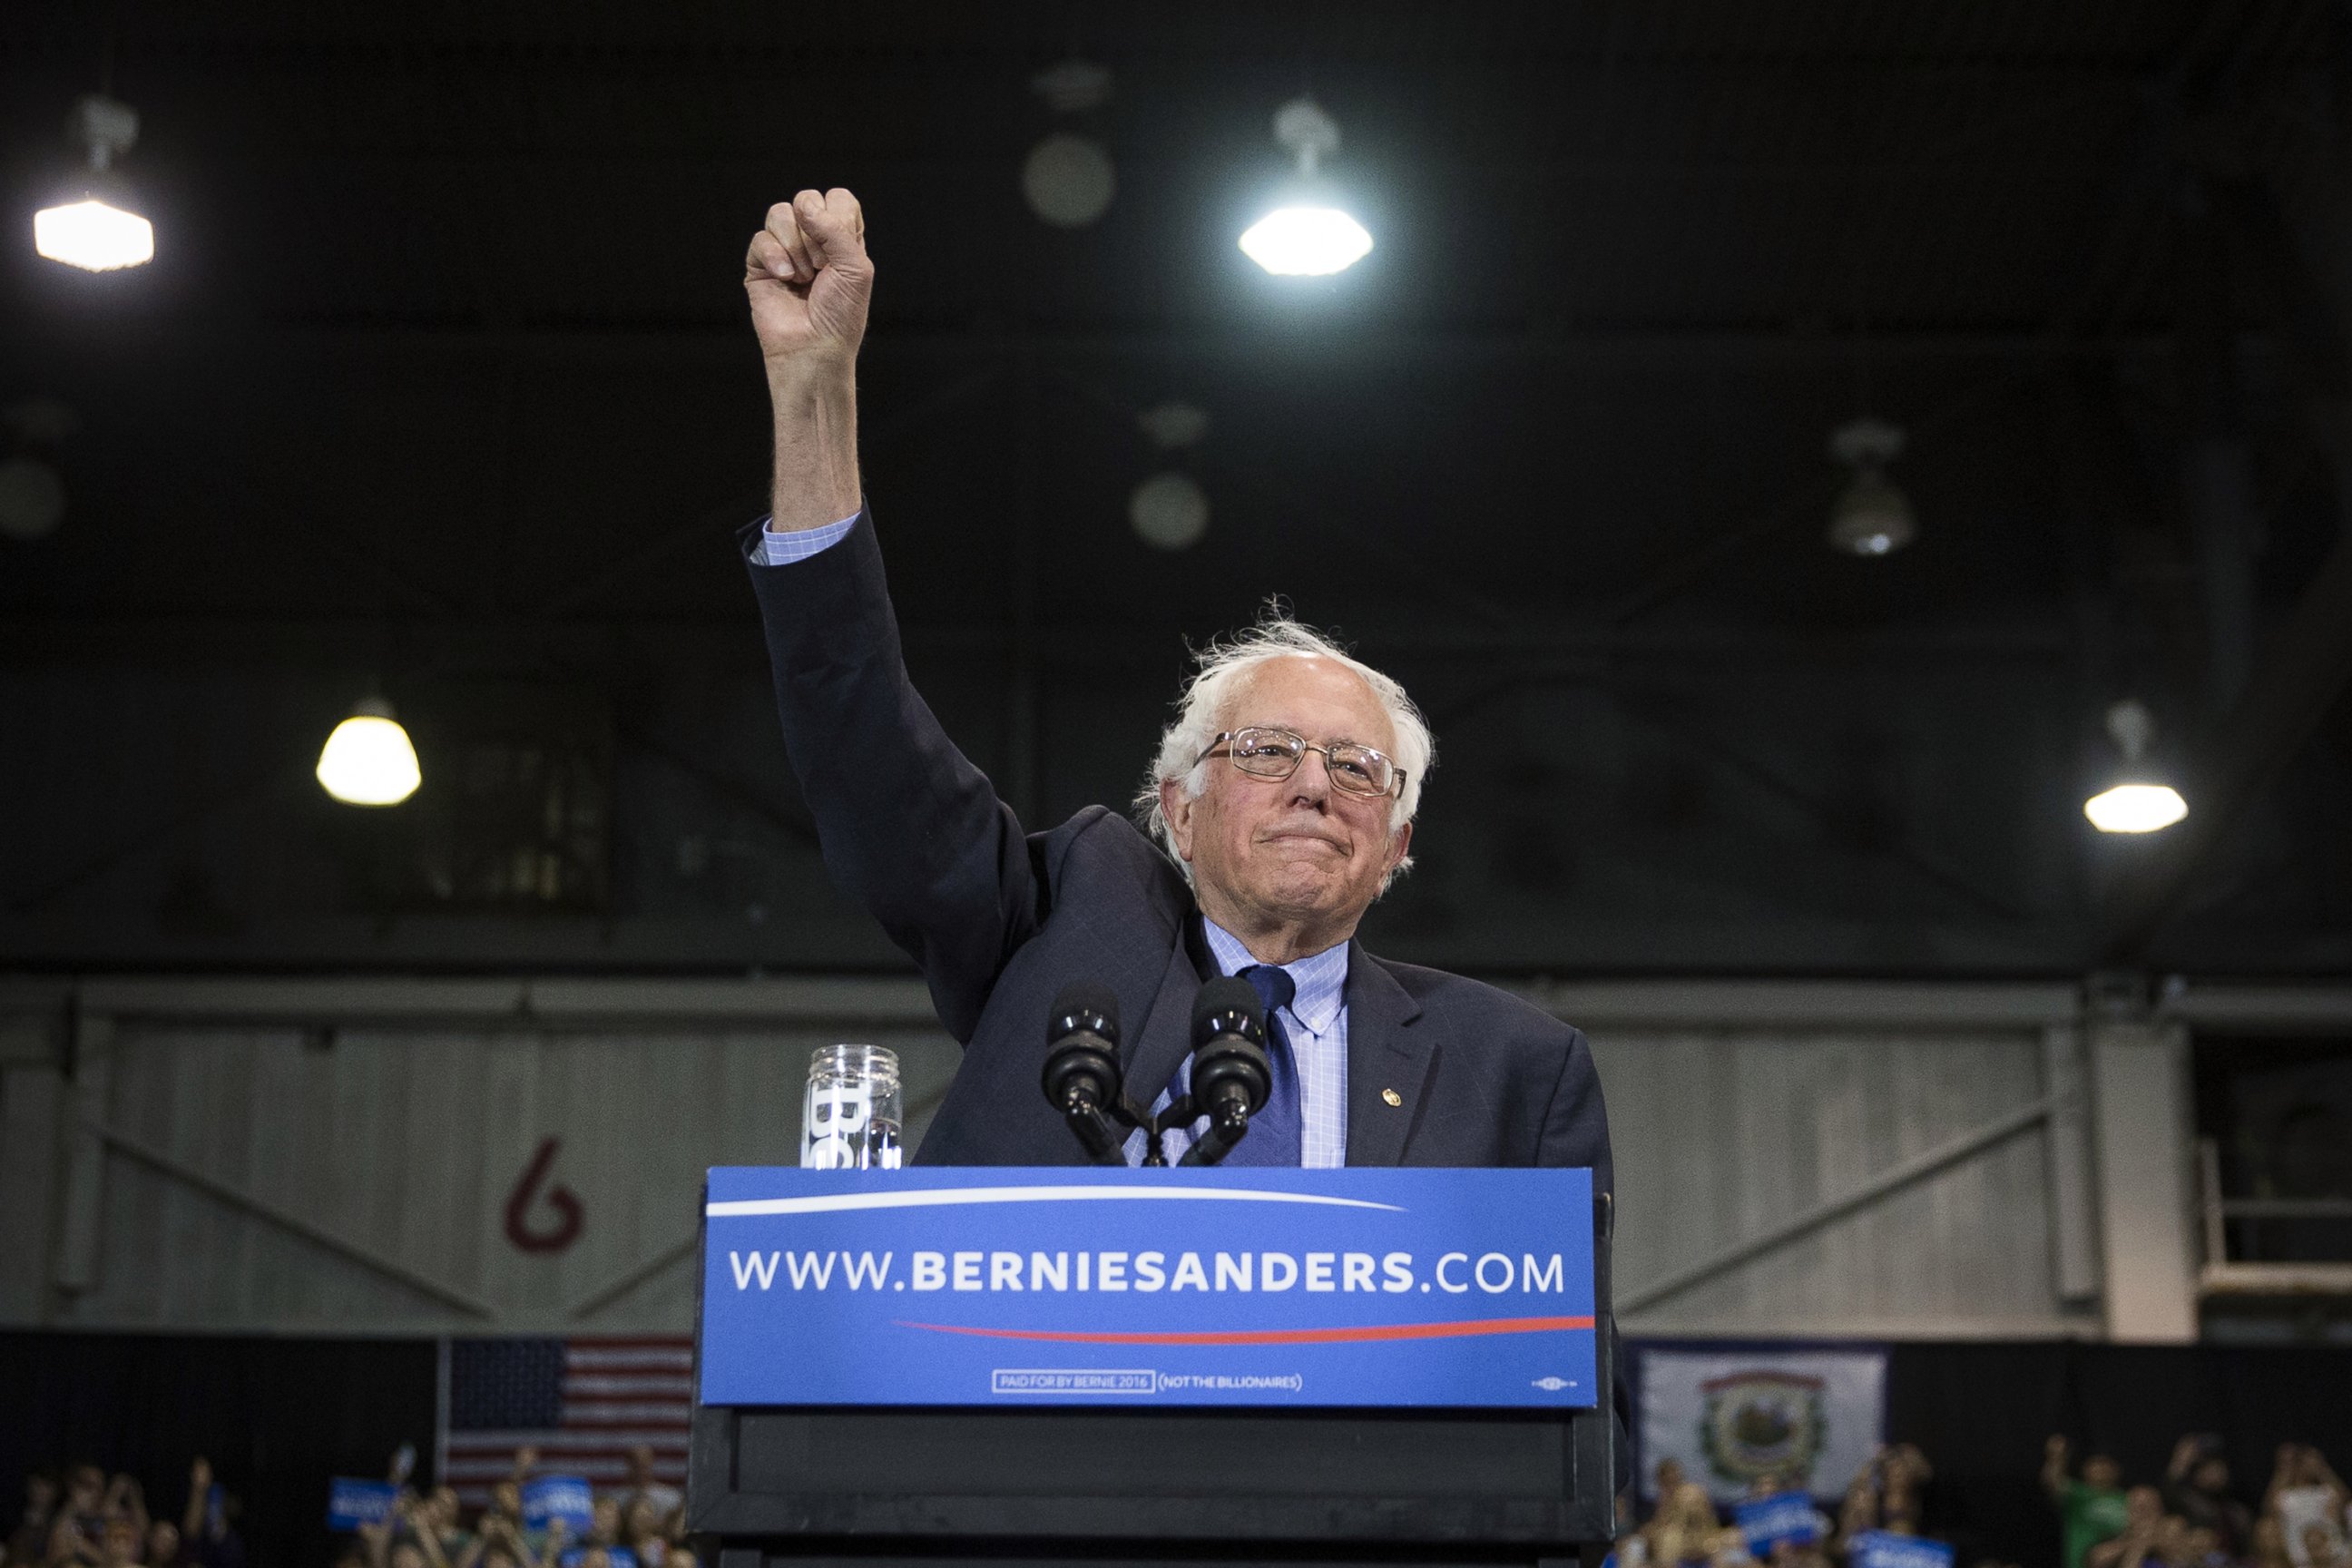 PHOTO: Democratic presidential candidate Sen. Bernie Sanders raises his fist to acknowledge the crowd before he speaks during an election night campaign event at the Big Sandy Superstore Arena on April 26, 2016, in Huntington, W.Va.